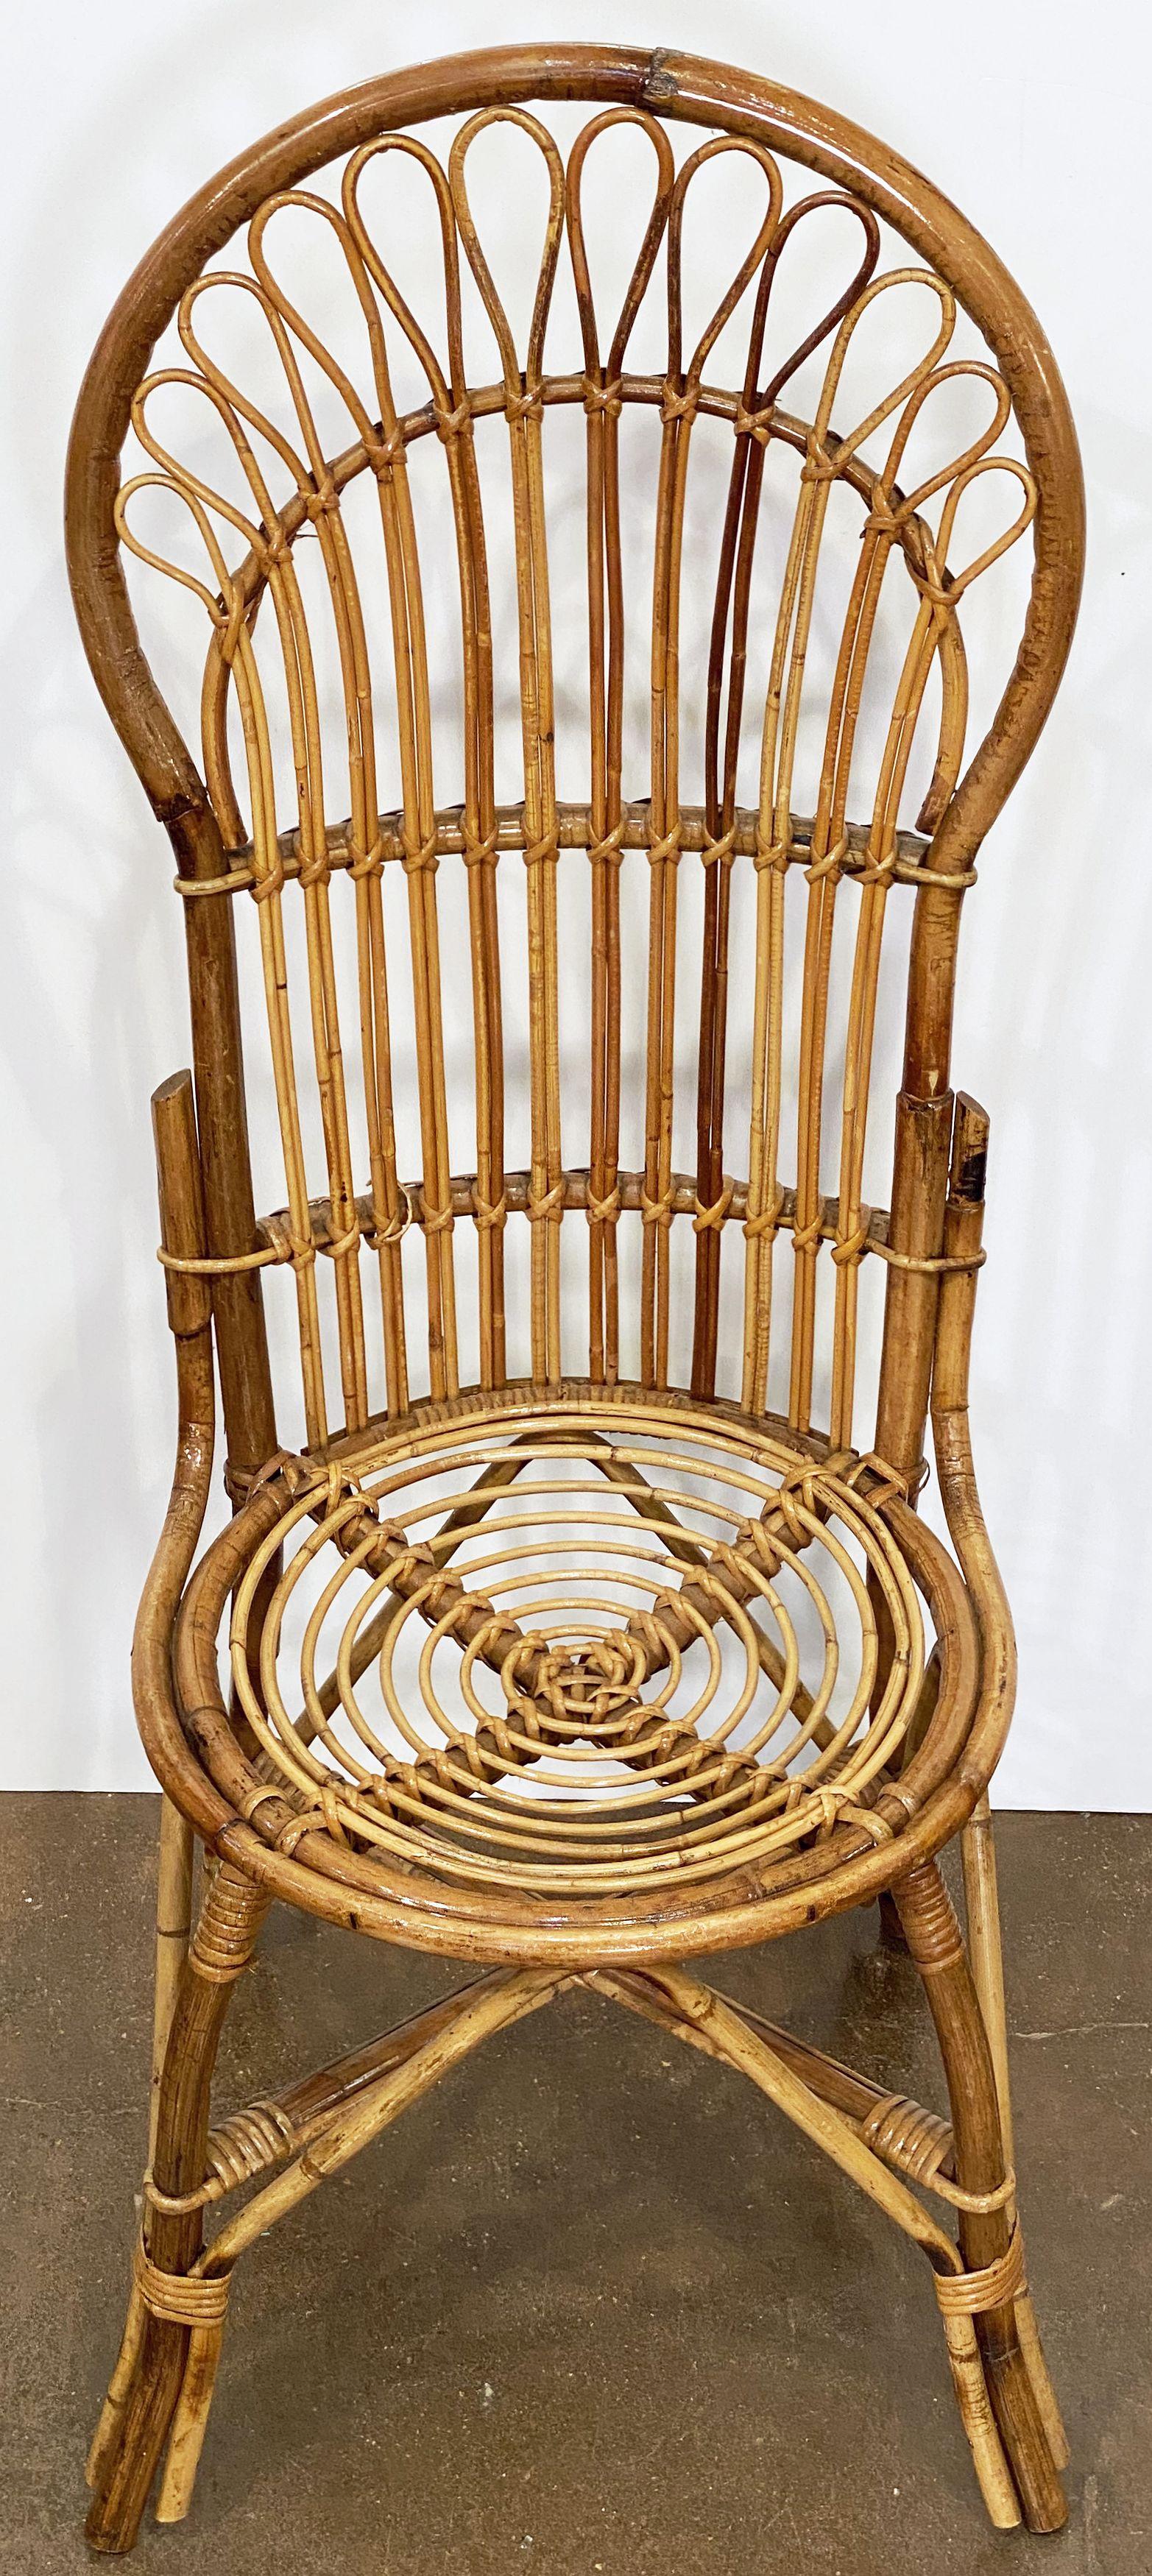 Italian Fan-Backed Chair of Rattan and Bamboo from the Mid-20th Century For Sale 3